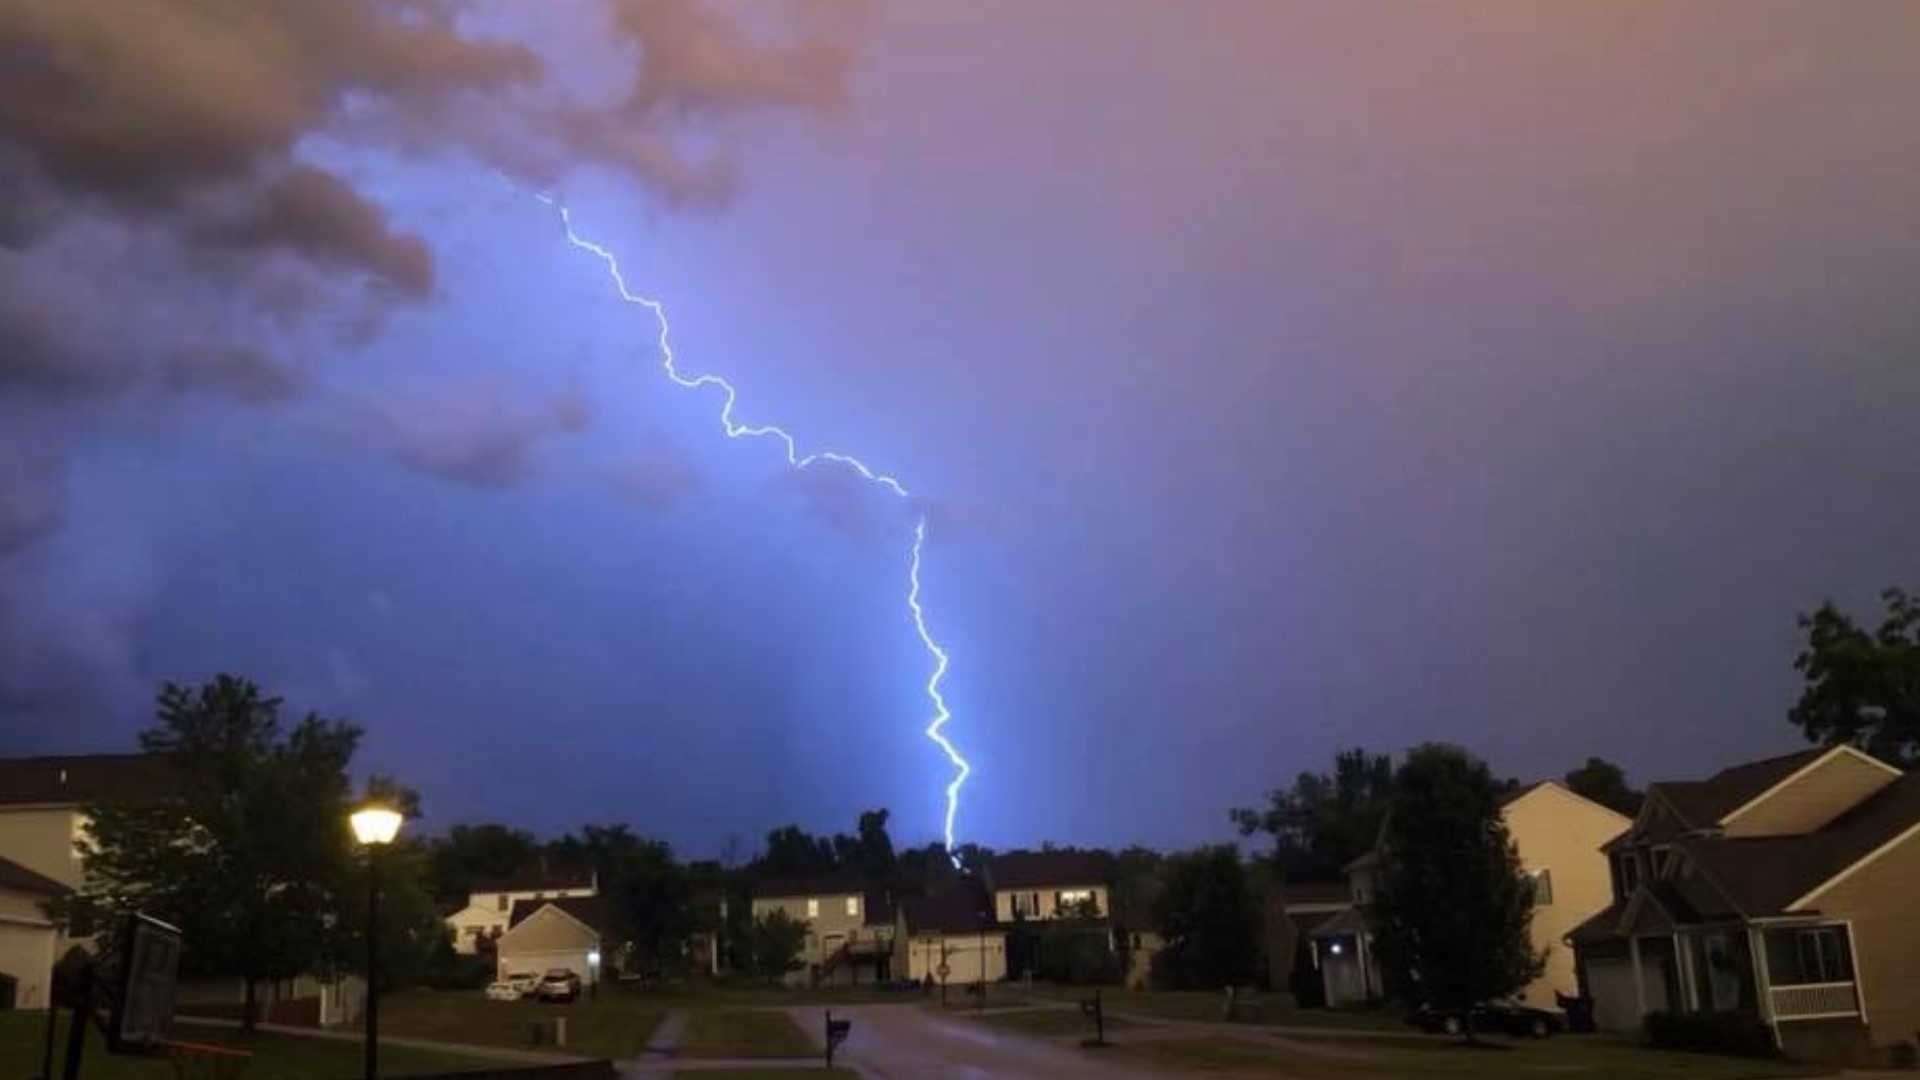 Lightning is formed when the difference in charges held by particles in clouds becomes too great, but let's let the expert explain it in a simpler way.